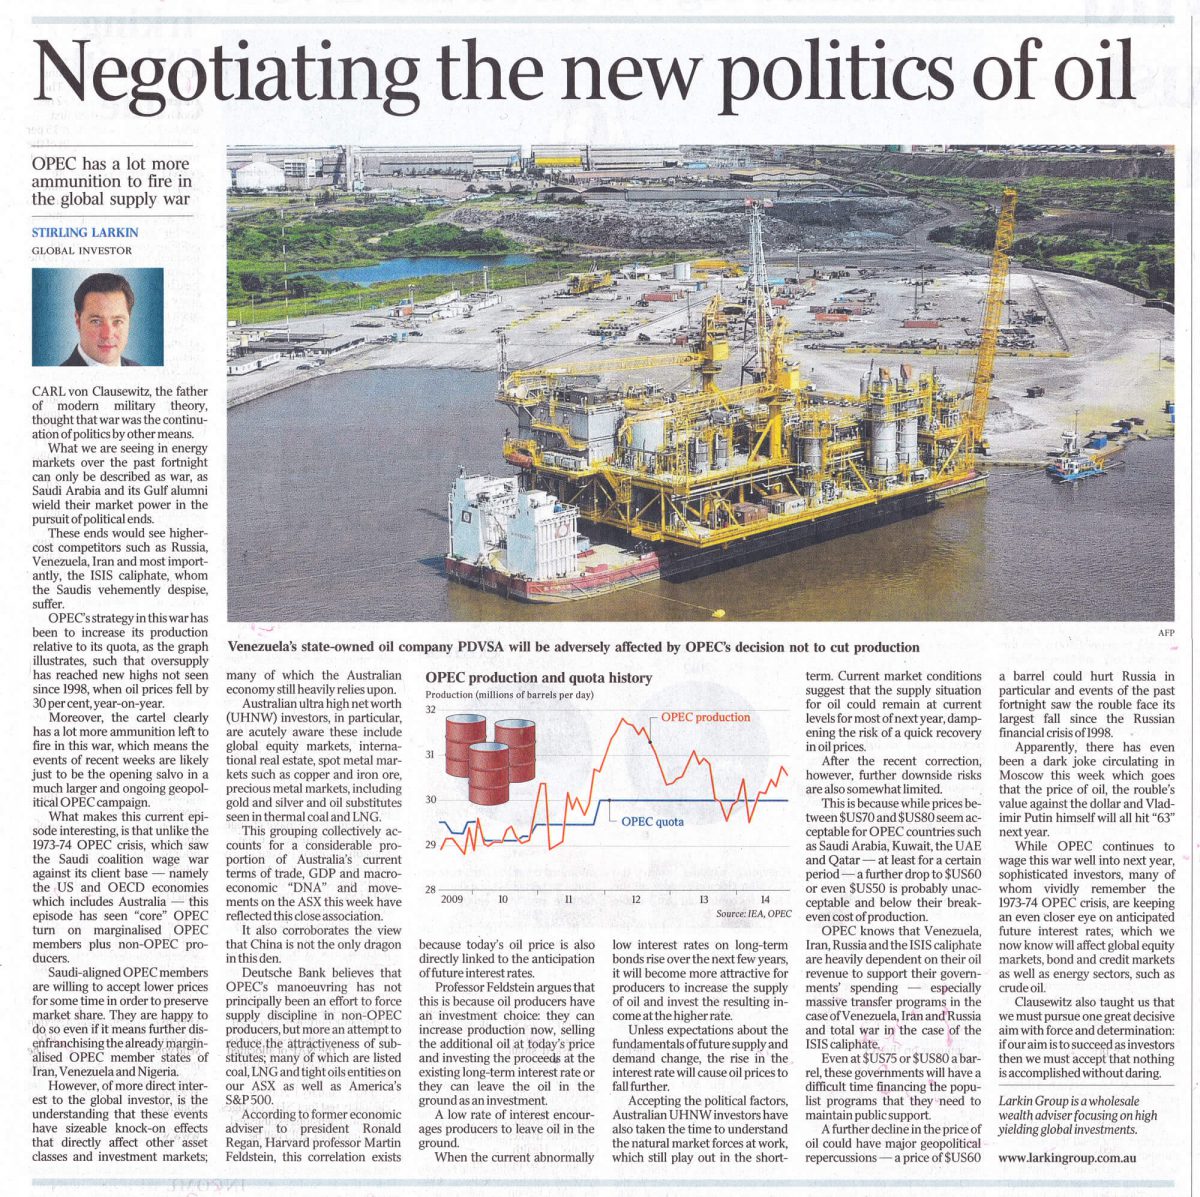 australian standfirst discusses world oil markets in 2014 in the australian newspaper